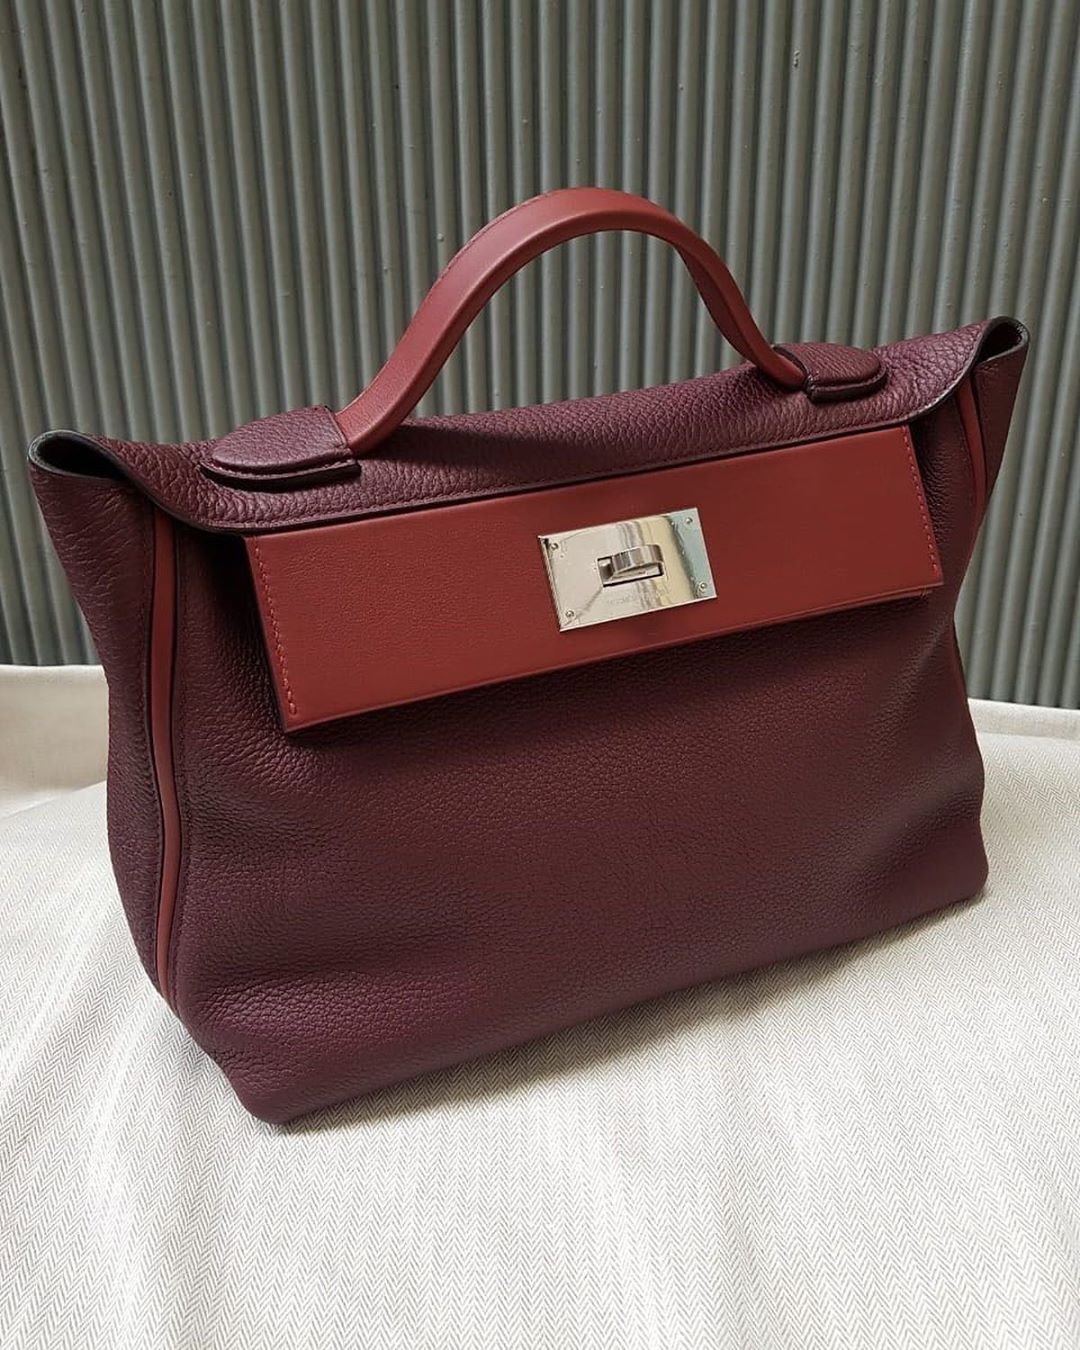 Hermes 24/24 size 21 2800 kd Ready for delivery